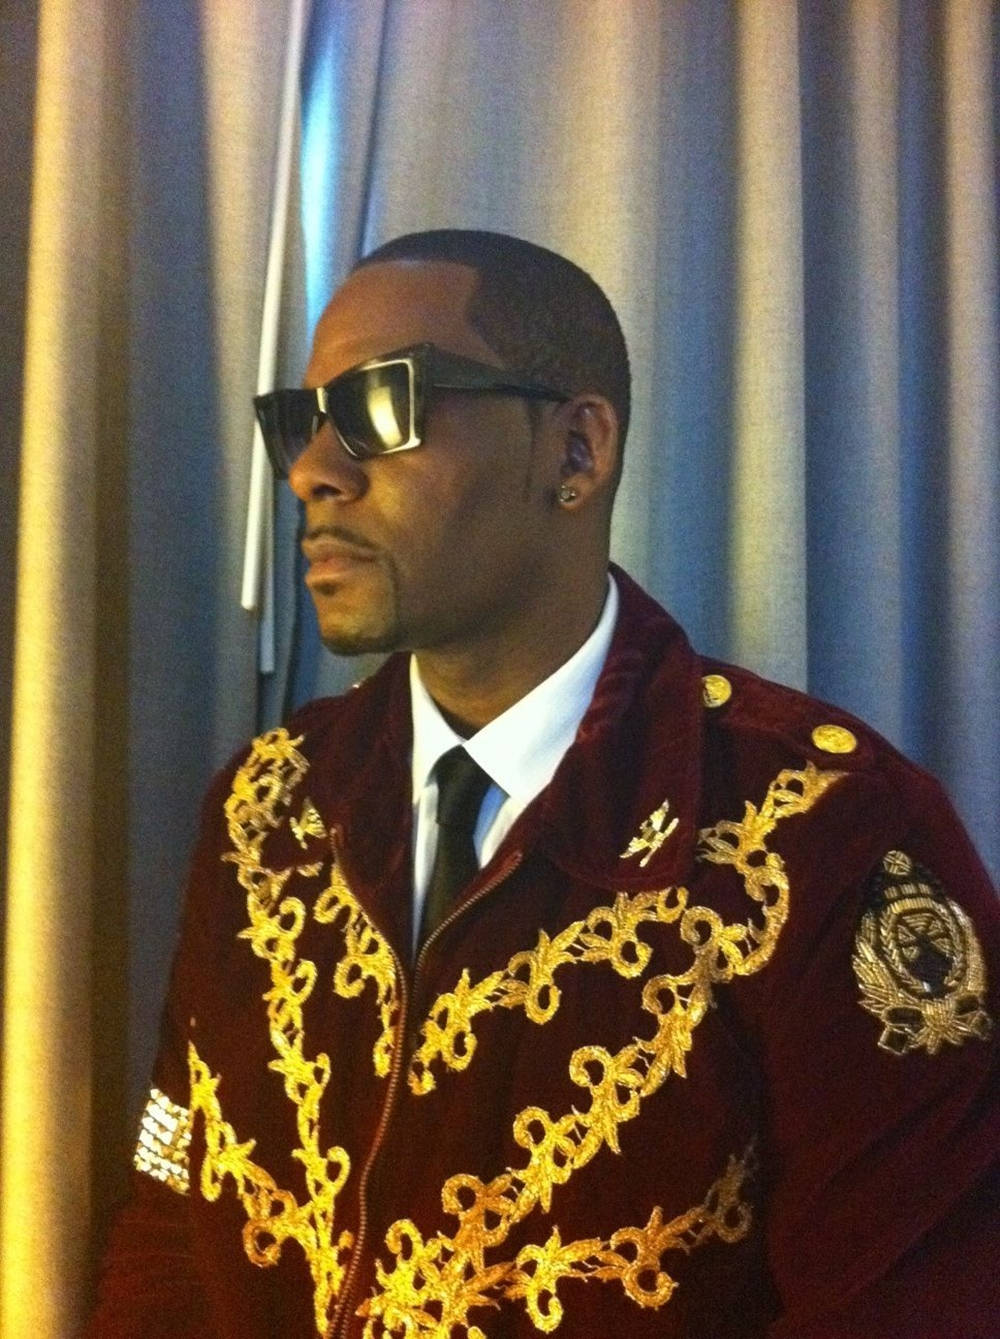 Singer R Kelly In Concert Outfit